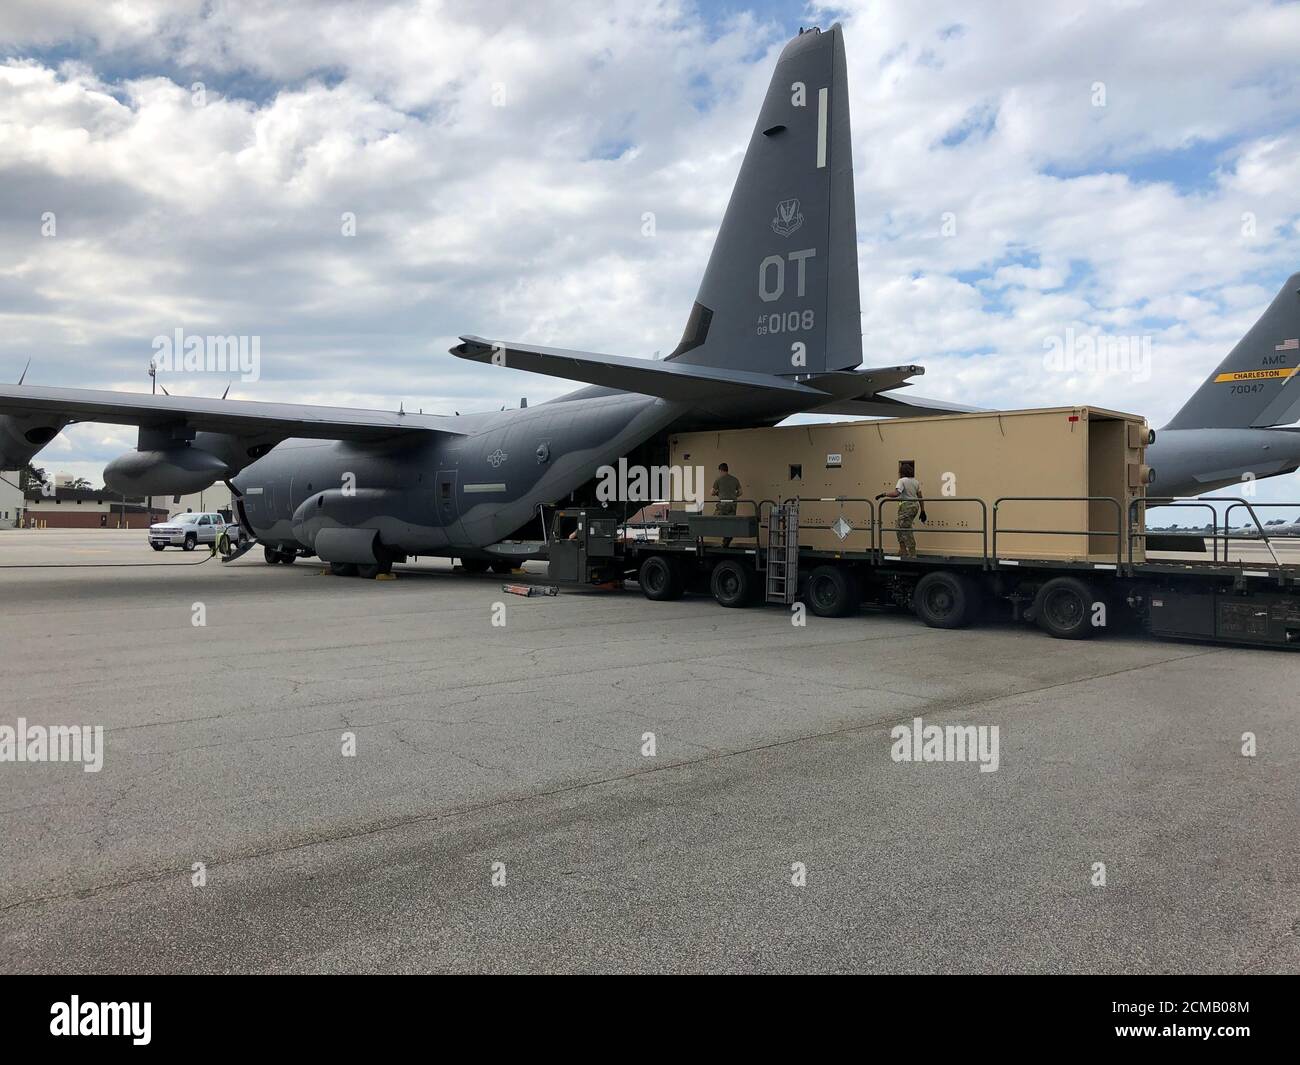 The Negatively Pressurized CONEX Lite system is placed inside an Air Force C-130 Hercules. The system is designed for transporting COVID-19 diagnosed and symptomatic warfighters out of forward installations and on to medical facilities. Stock Photo